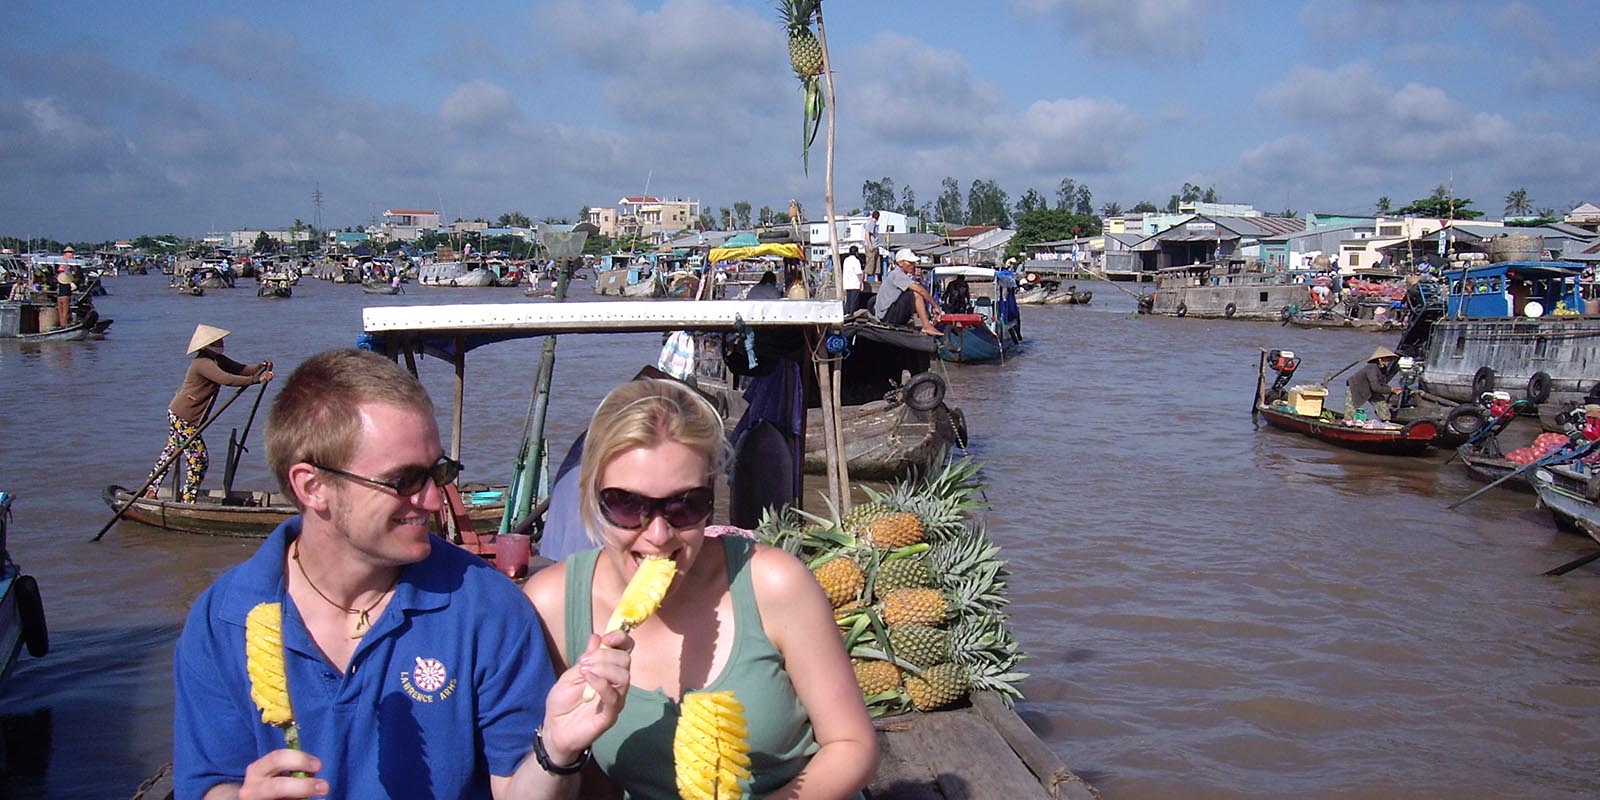 Mekong Delta 2 Days 1 night tour: My Tho – Ben Tre – Can Tho